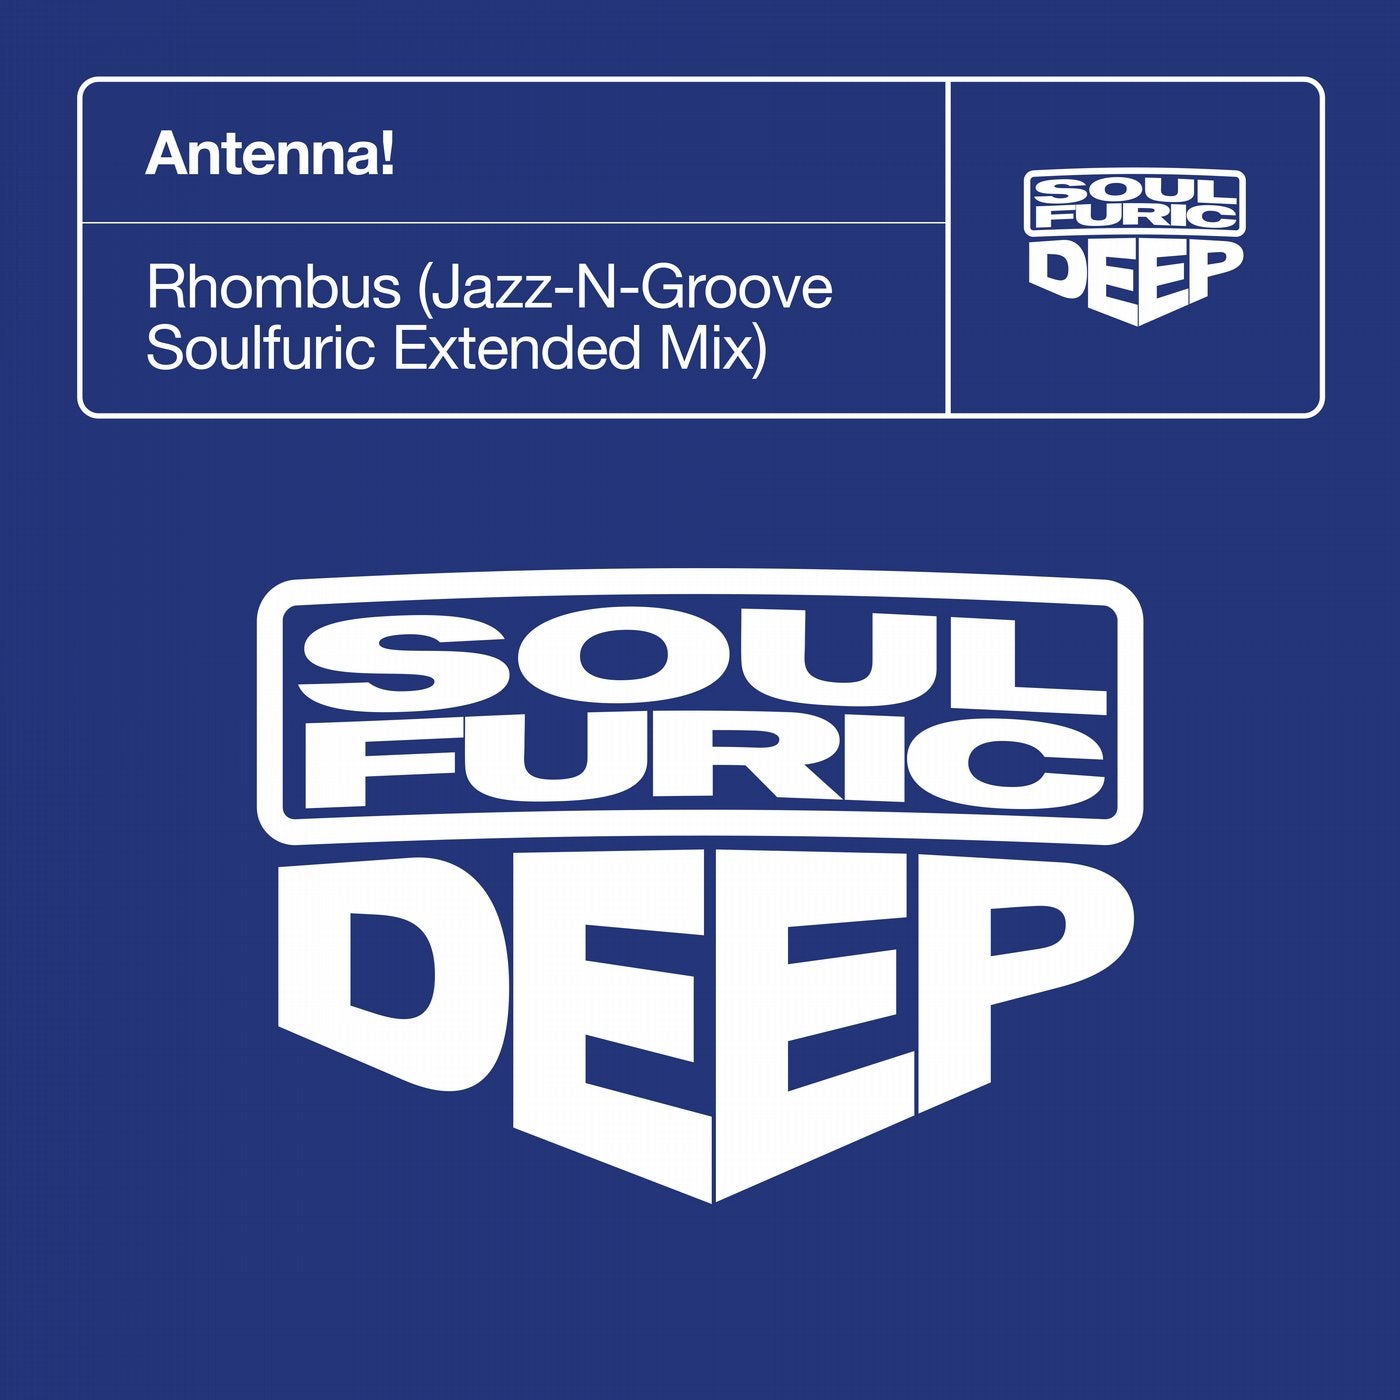 Rhombus - Jazz-N-Groove Soulfuric Extended Mix